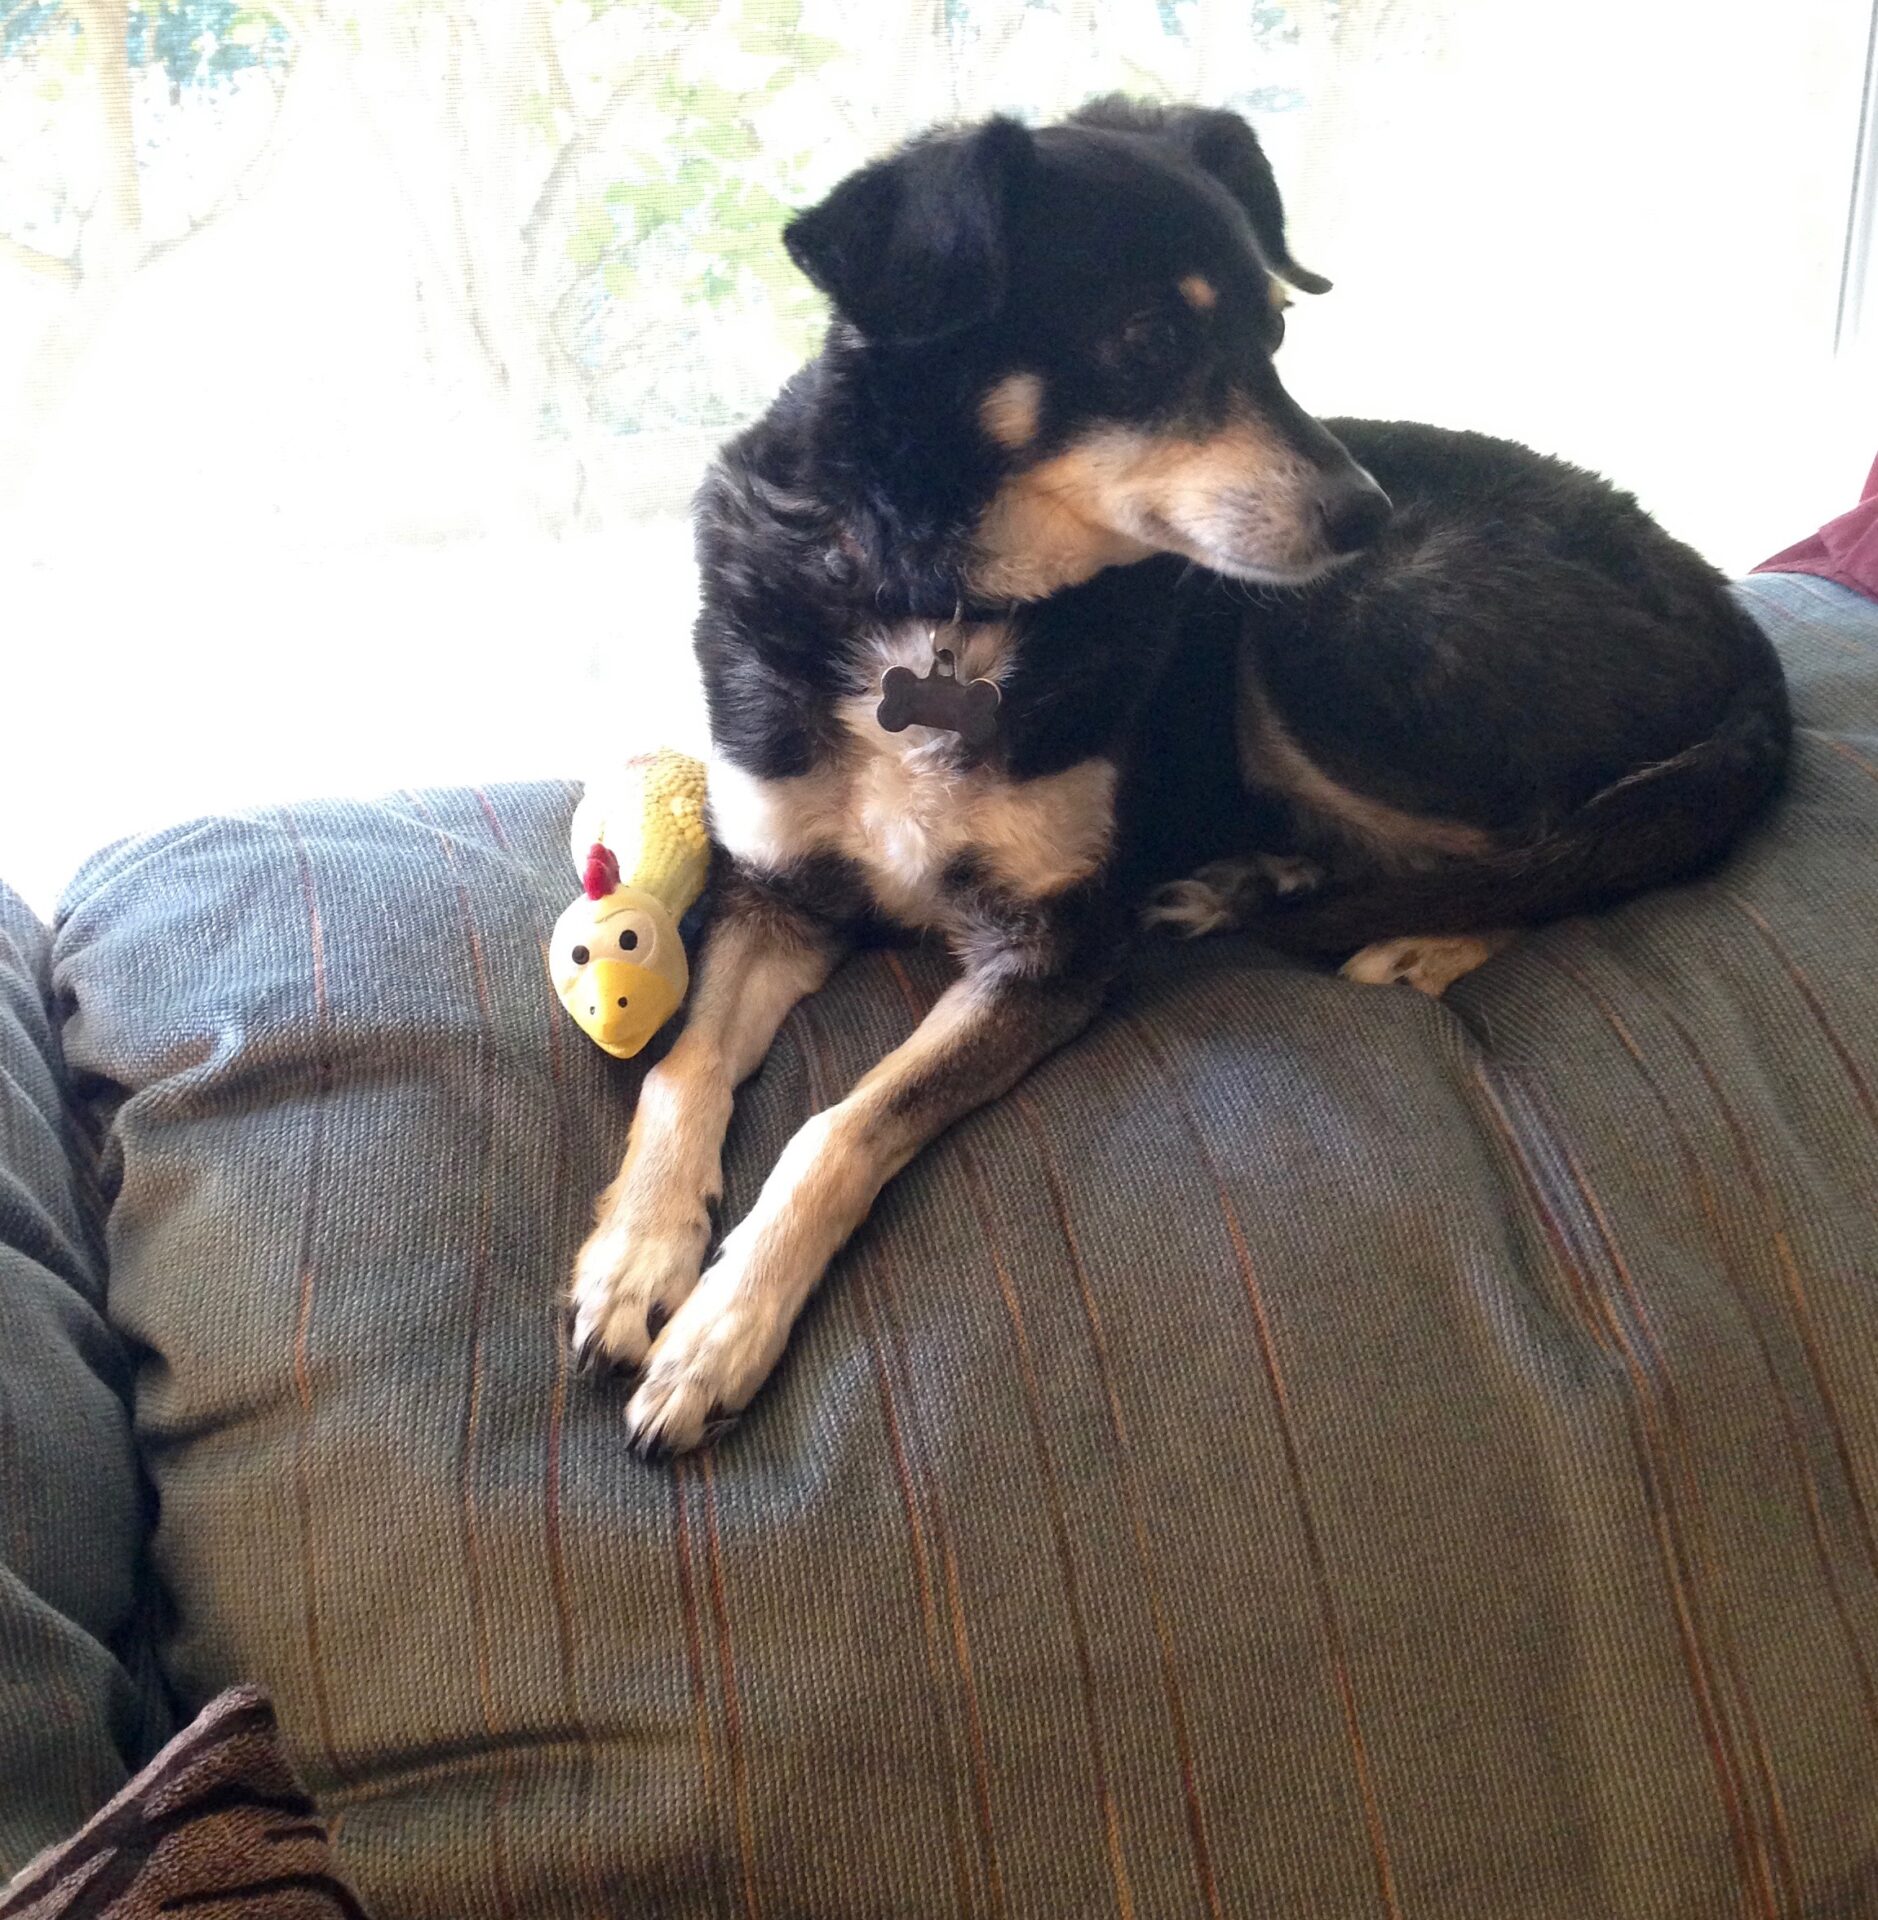 Image of Missy, a black and tan dog, comfortably lying on a blanket on top of a couch